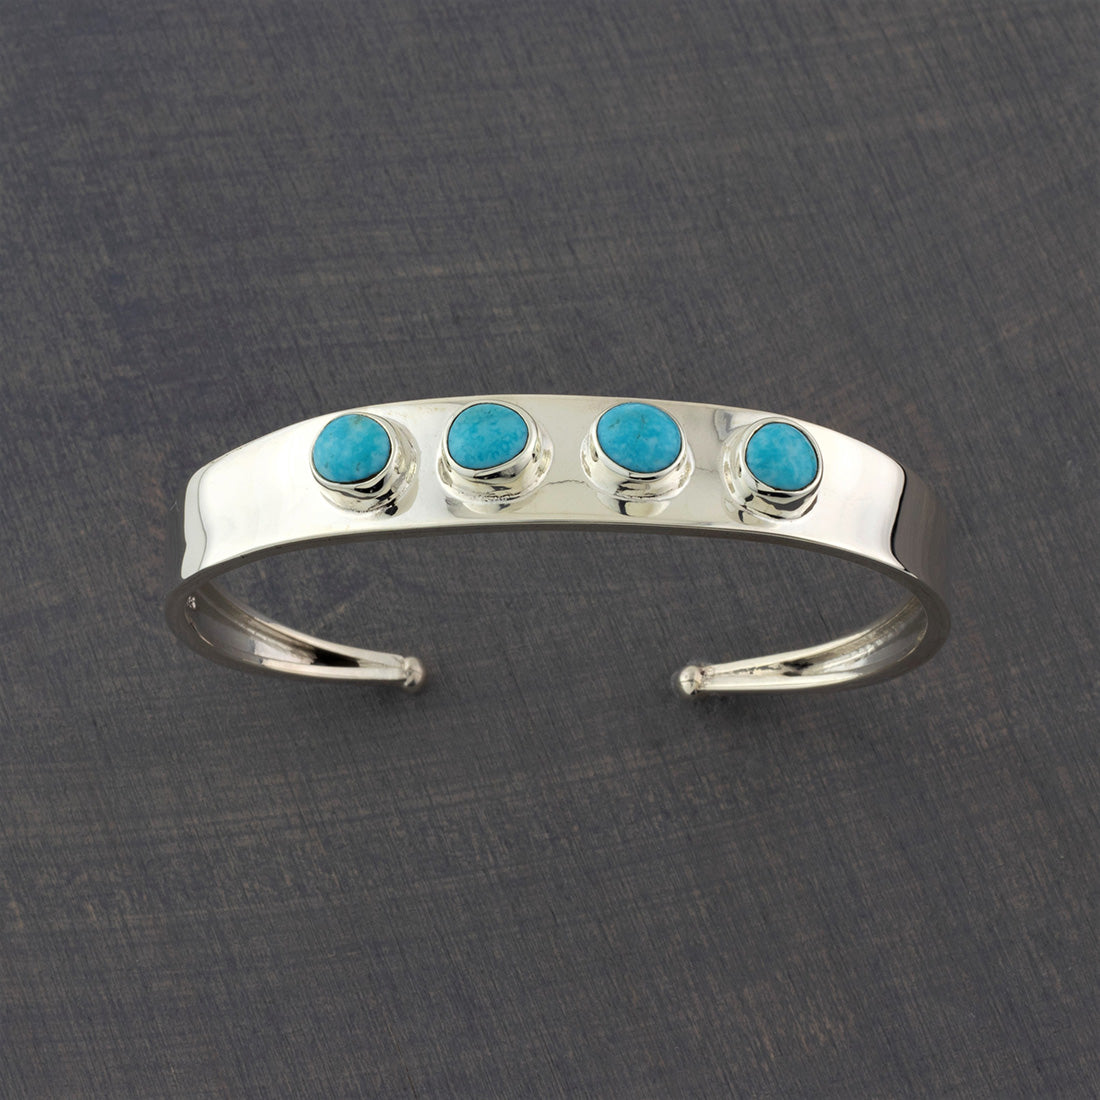 multi stone turquoise and silver cuff bracelet